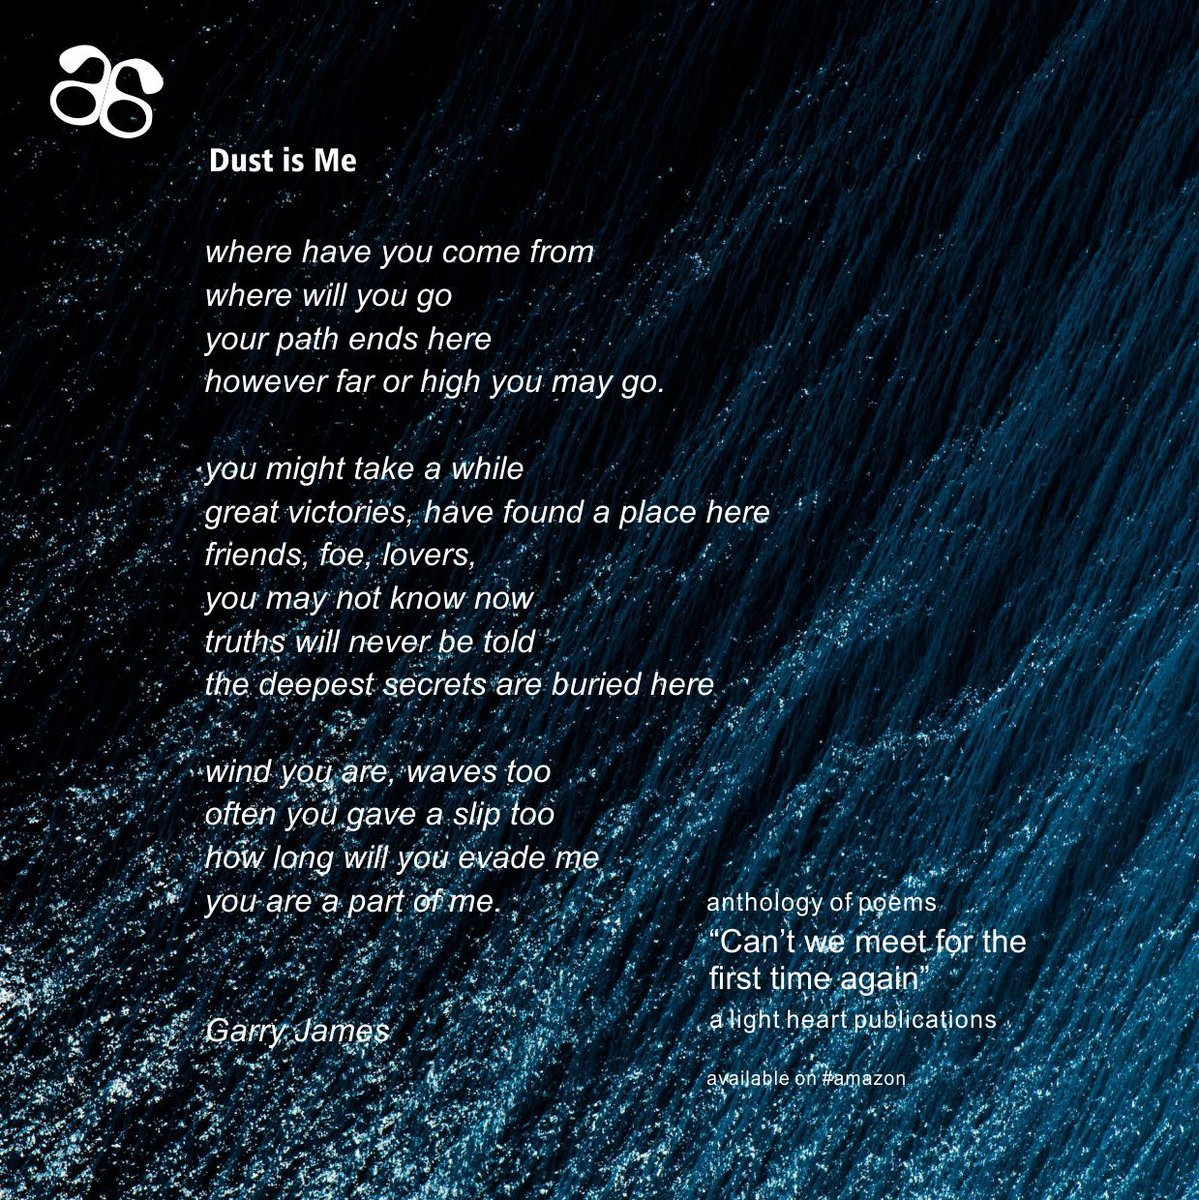 Dust is me...a lovely read
Inspiring poems & stories ... keep watching for more
#poem #poemas #poetry #inspiringpoems #inspiringstory #love #passion #inspiration #alightheart #readingcommunity #twittercommunity #poetrylovers #storylovers #booklovers